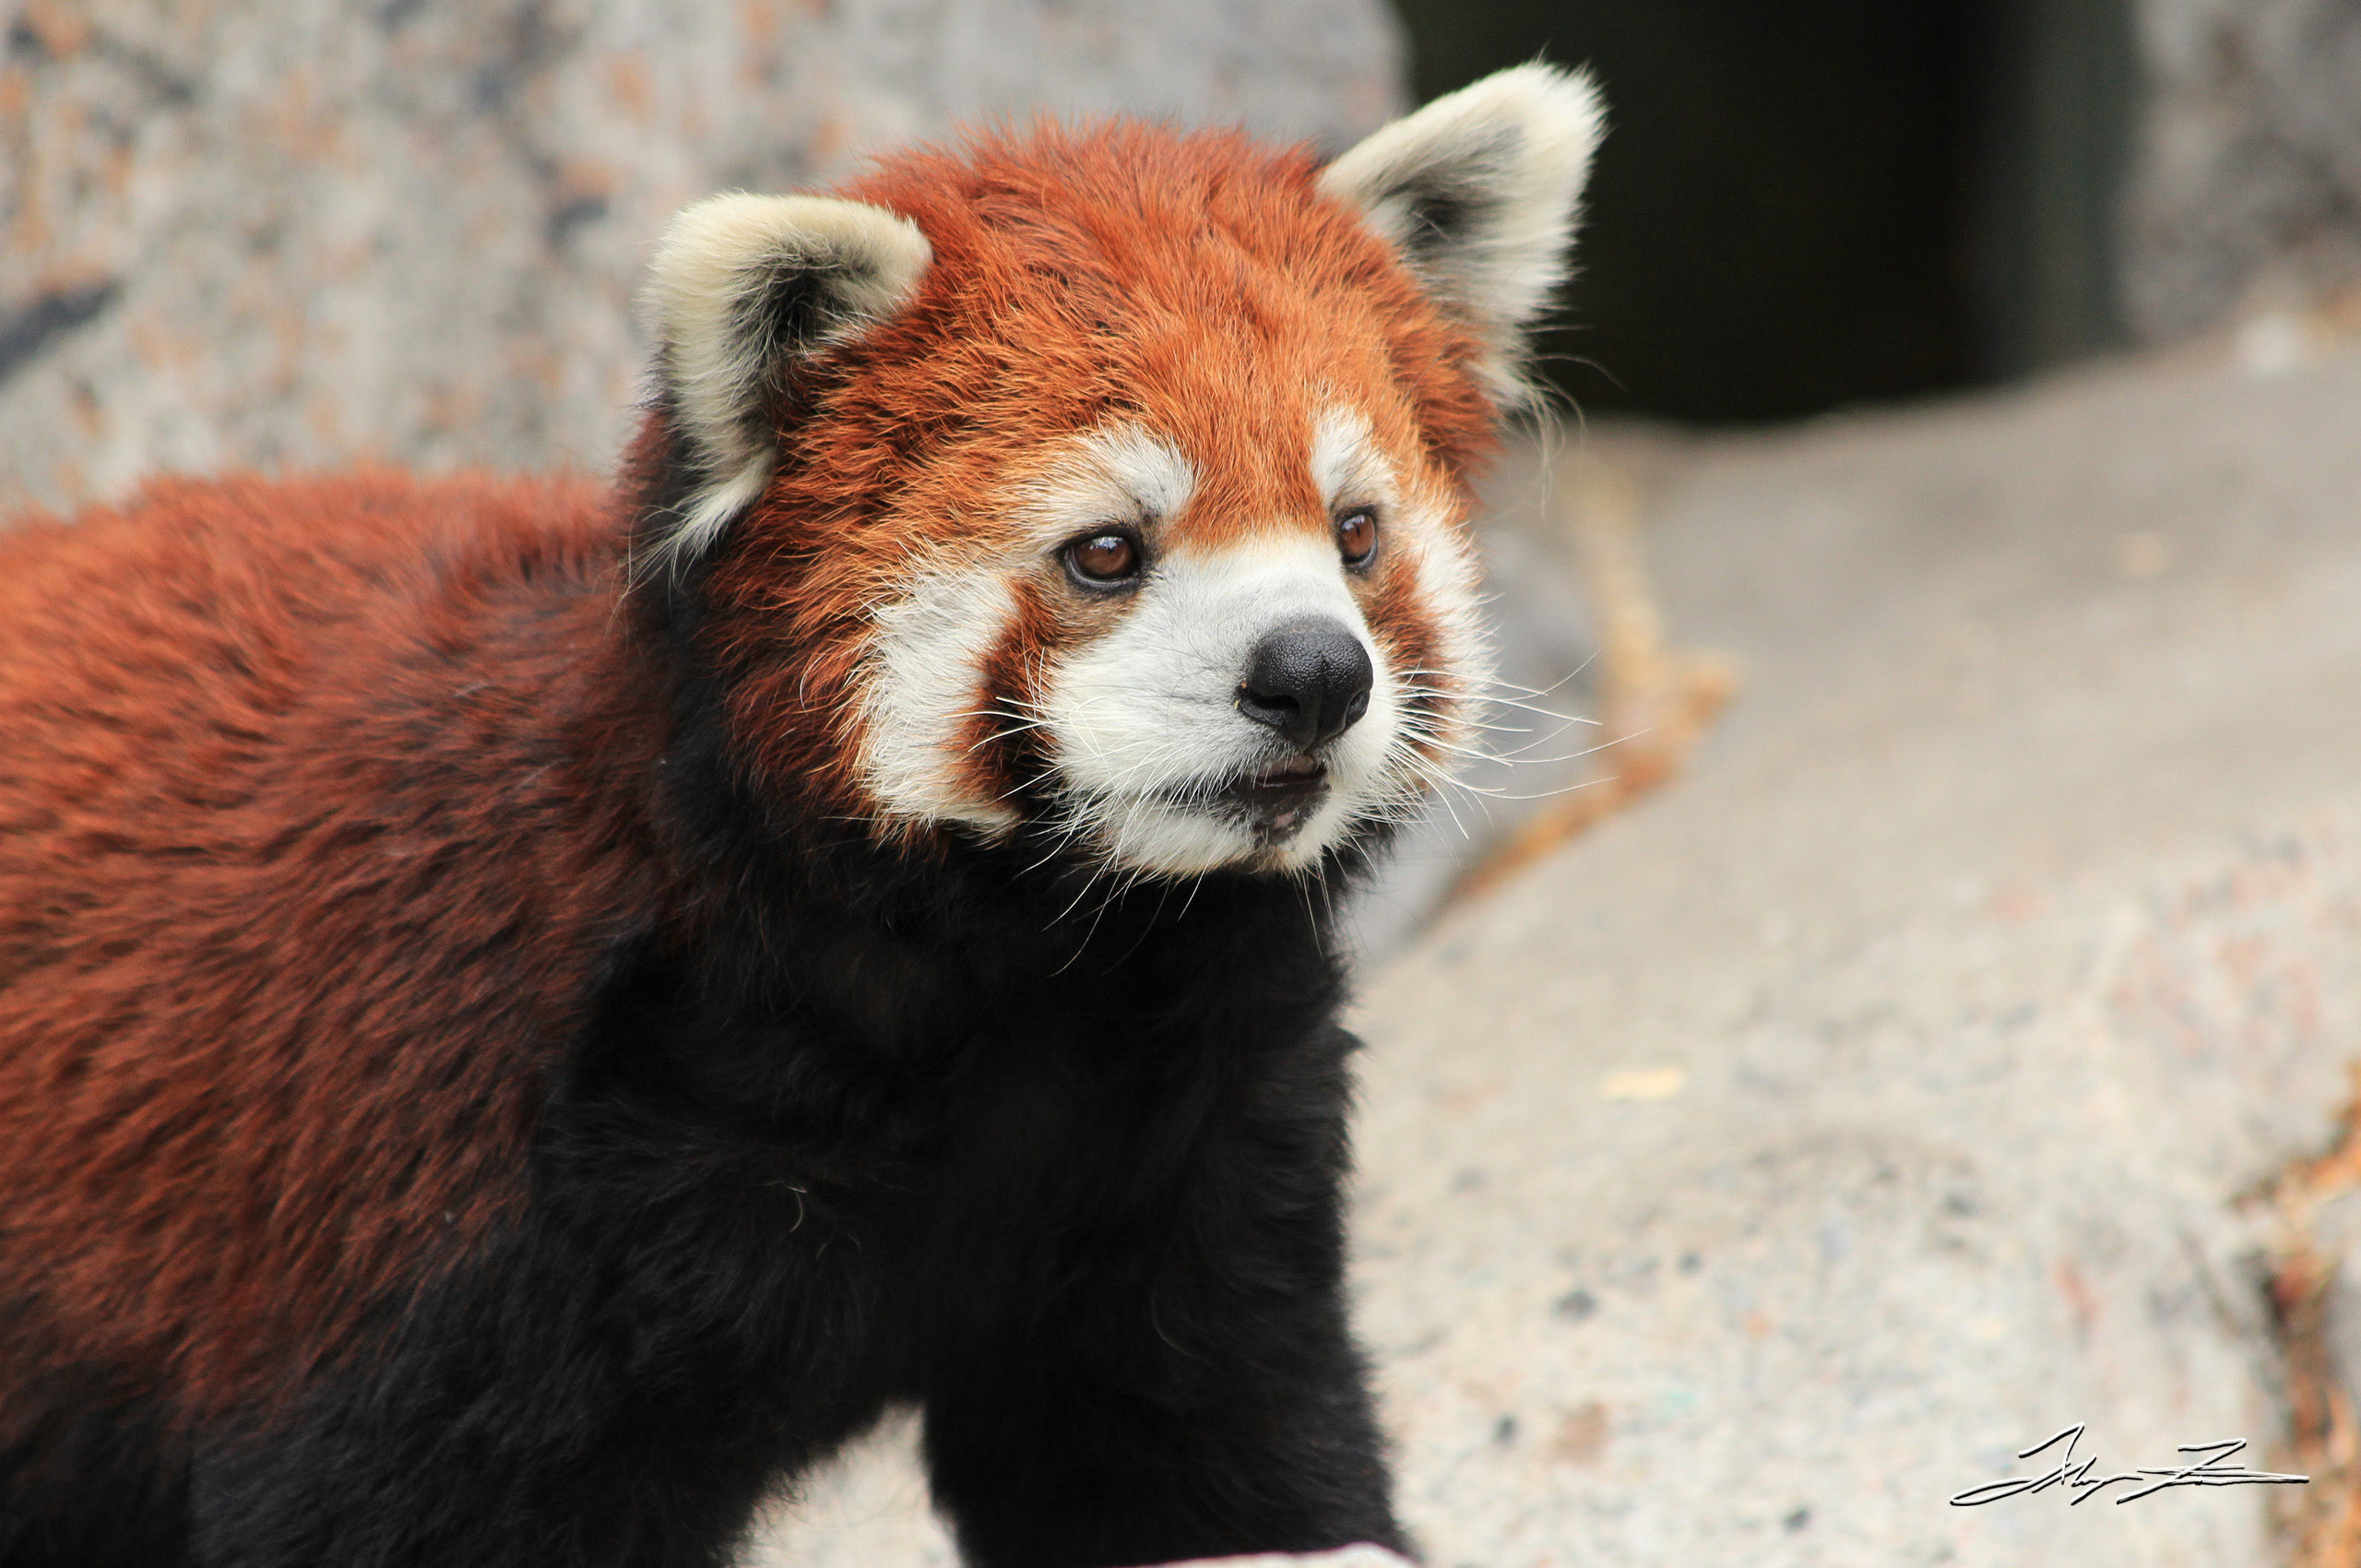 A red panda, captured by photographer and DPUB student Alayna Fairman